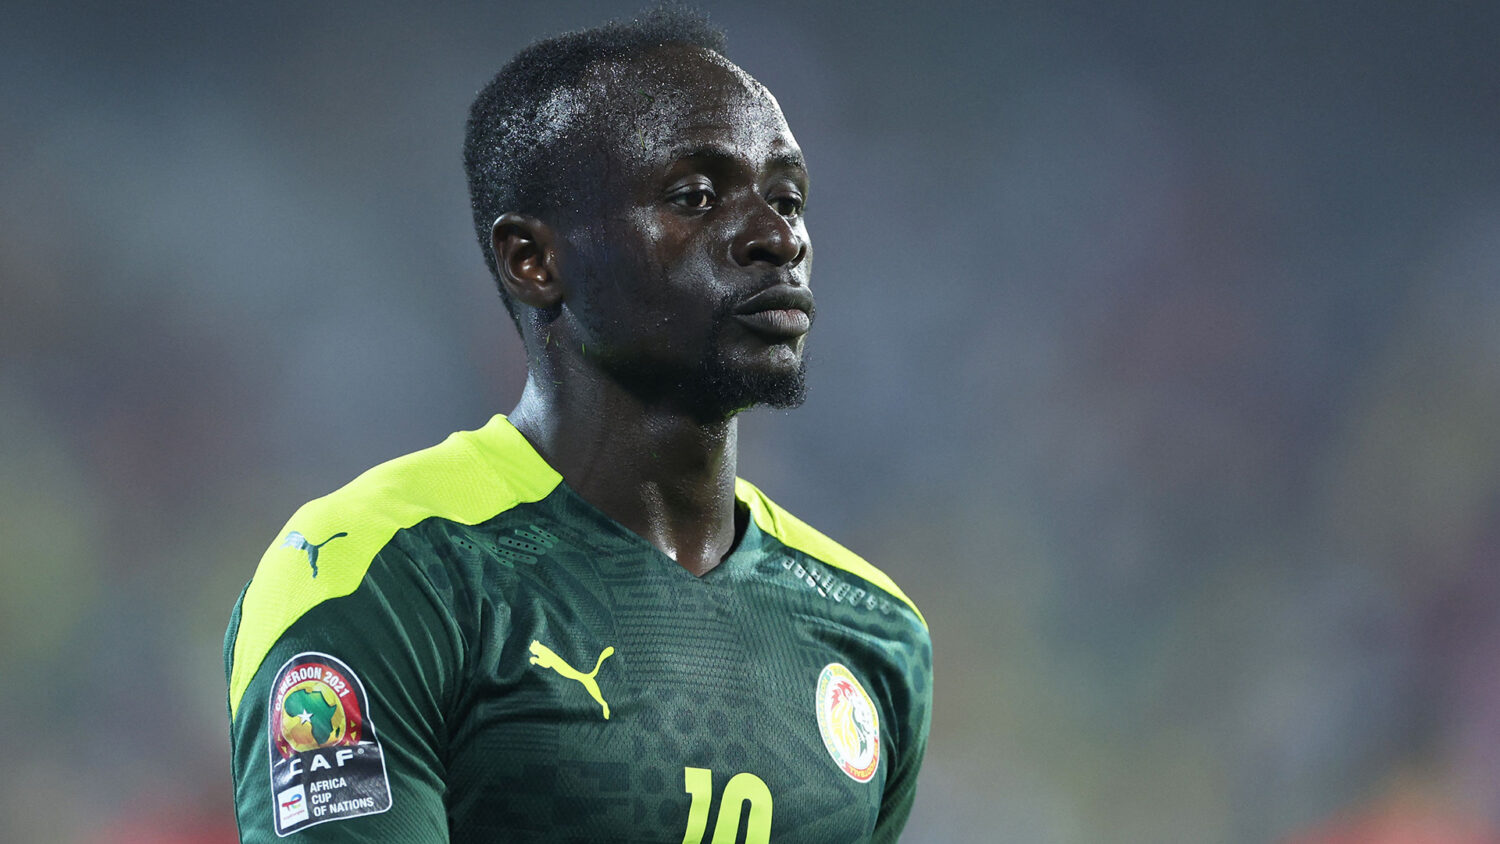 Sadio Mane To Miss 'First Games' Of World Cup With Injury